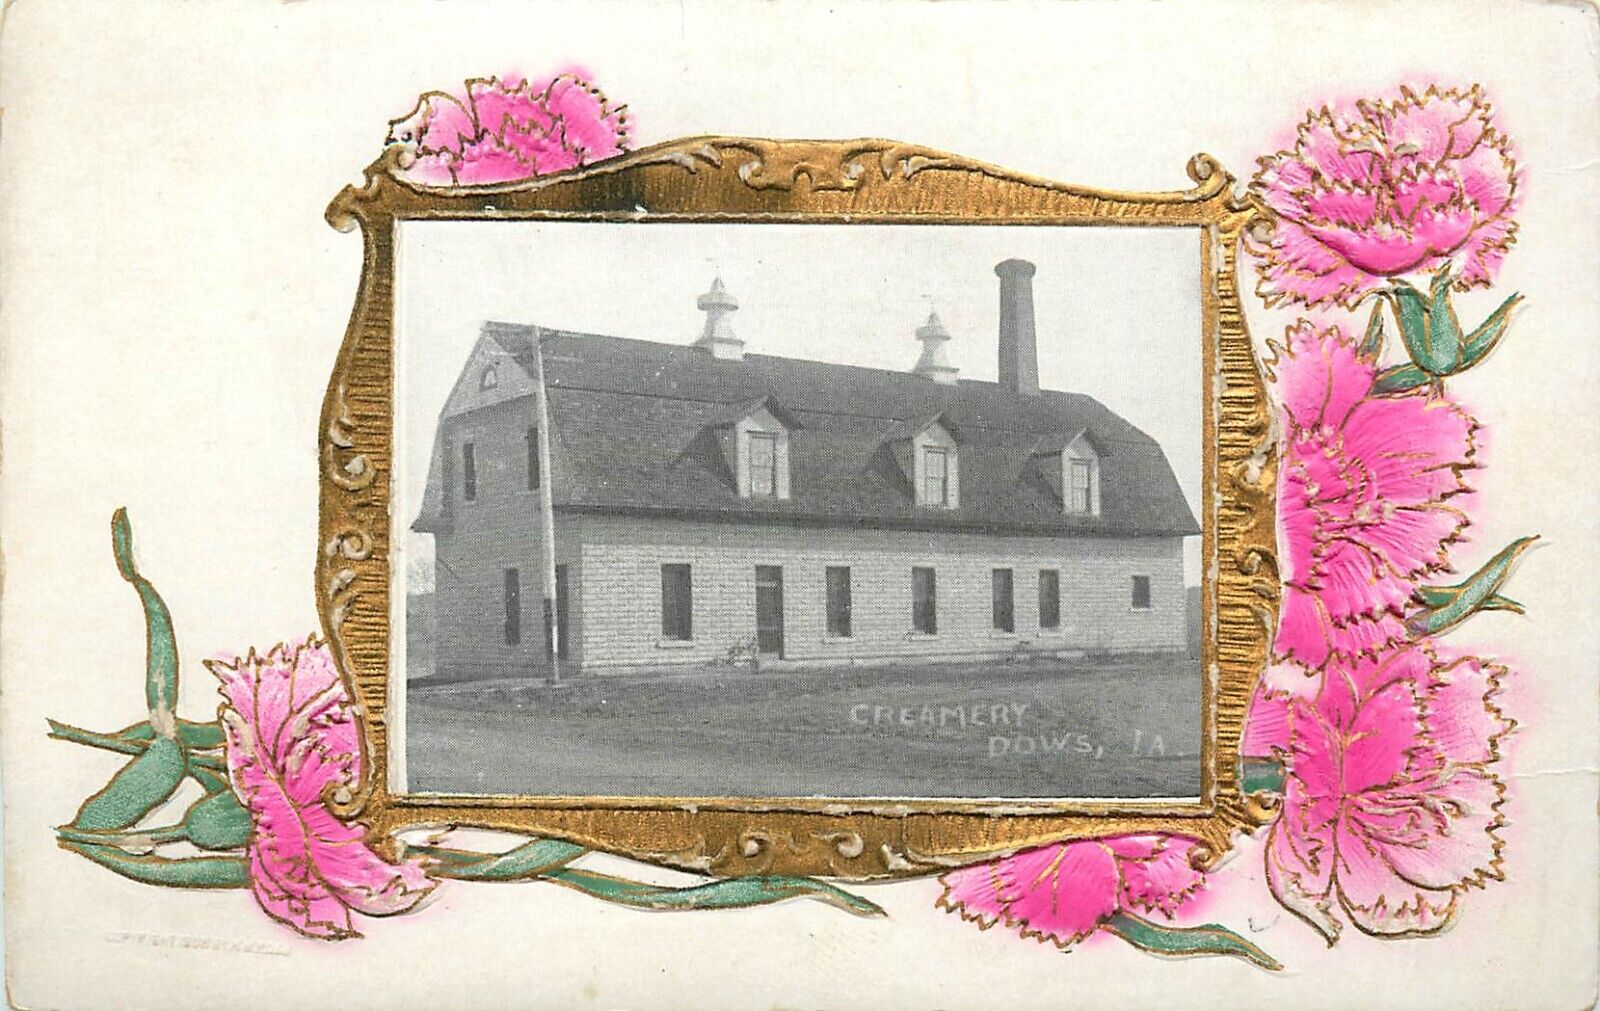 c1908 Postcard; Creamery, Dows IA, Embossed Floral Vignette, Unposted